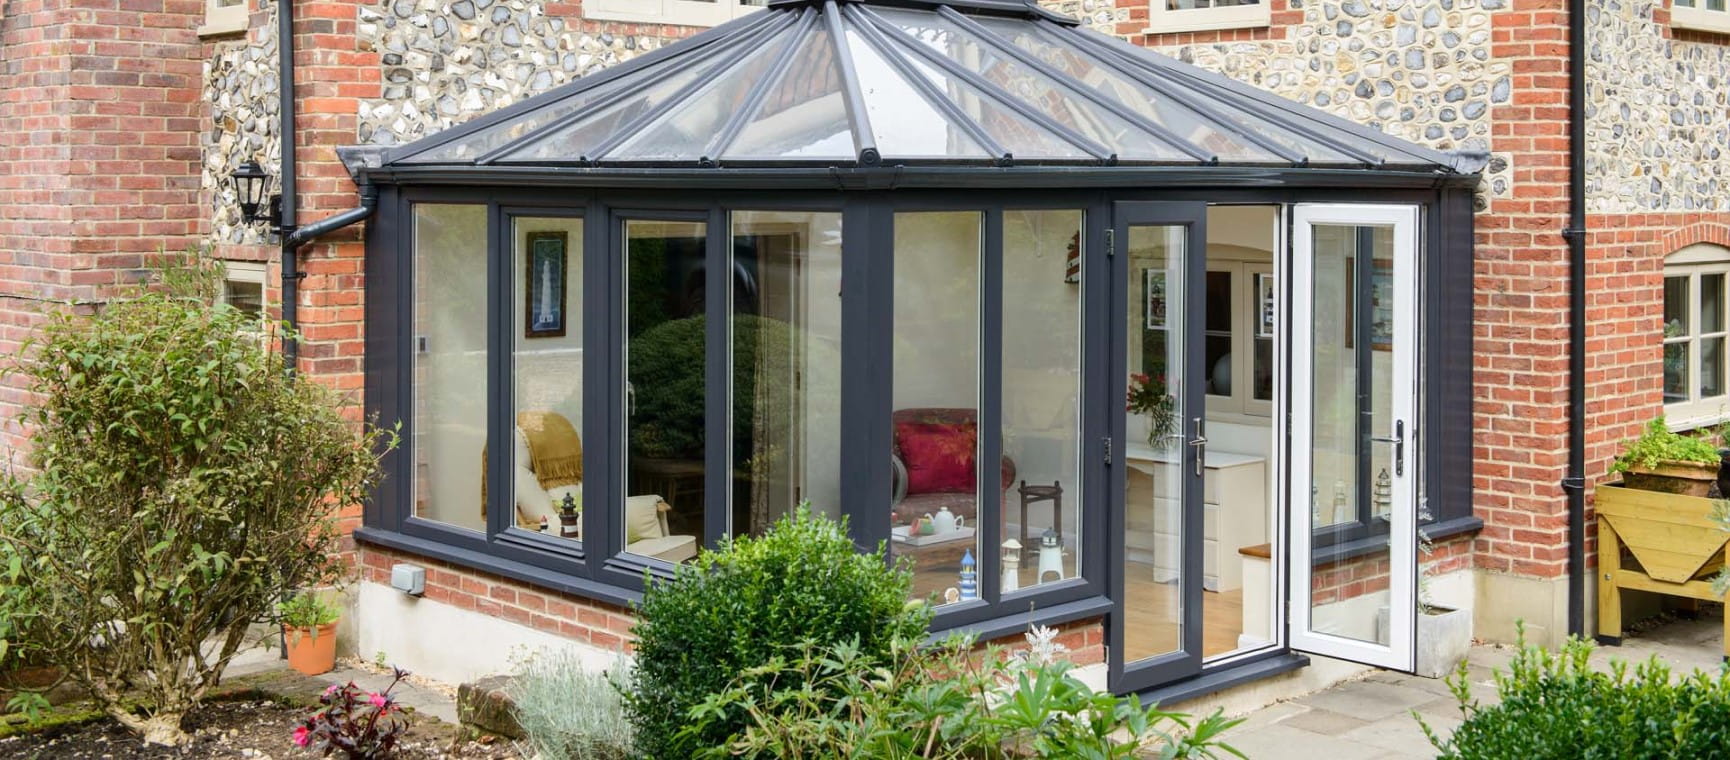 A conservatory with a reflective roof to repel heat